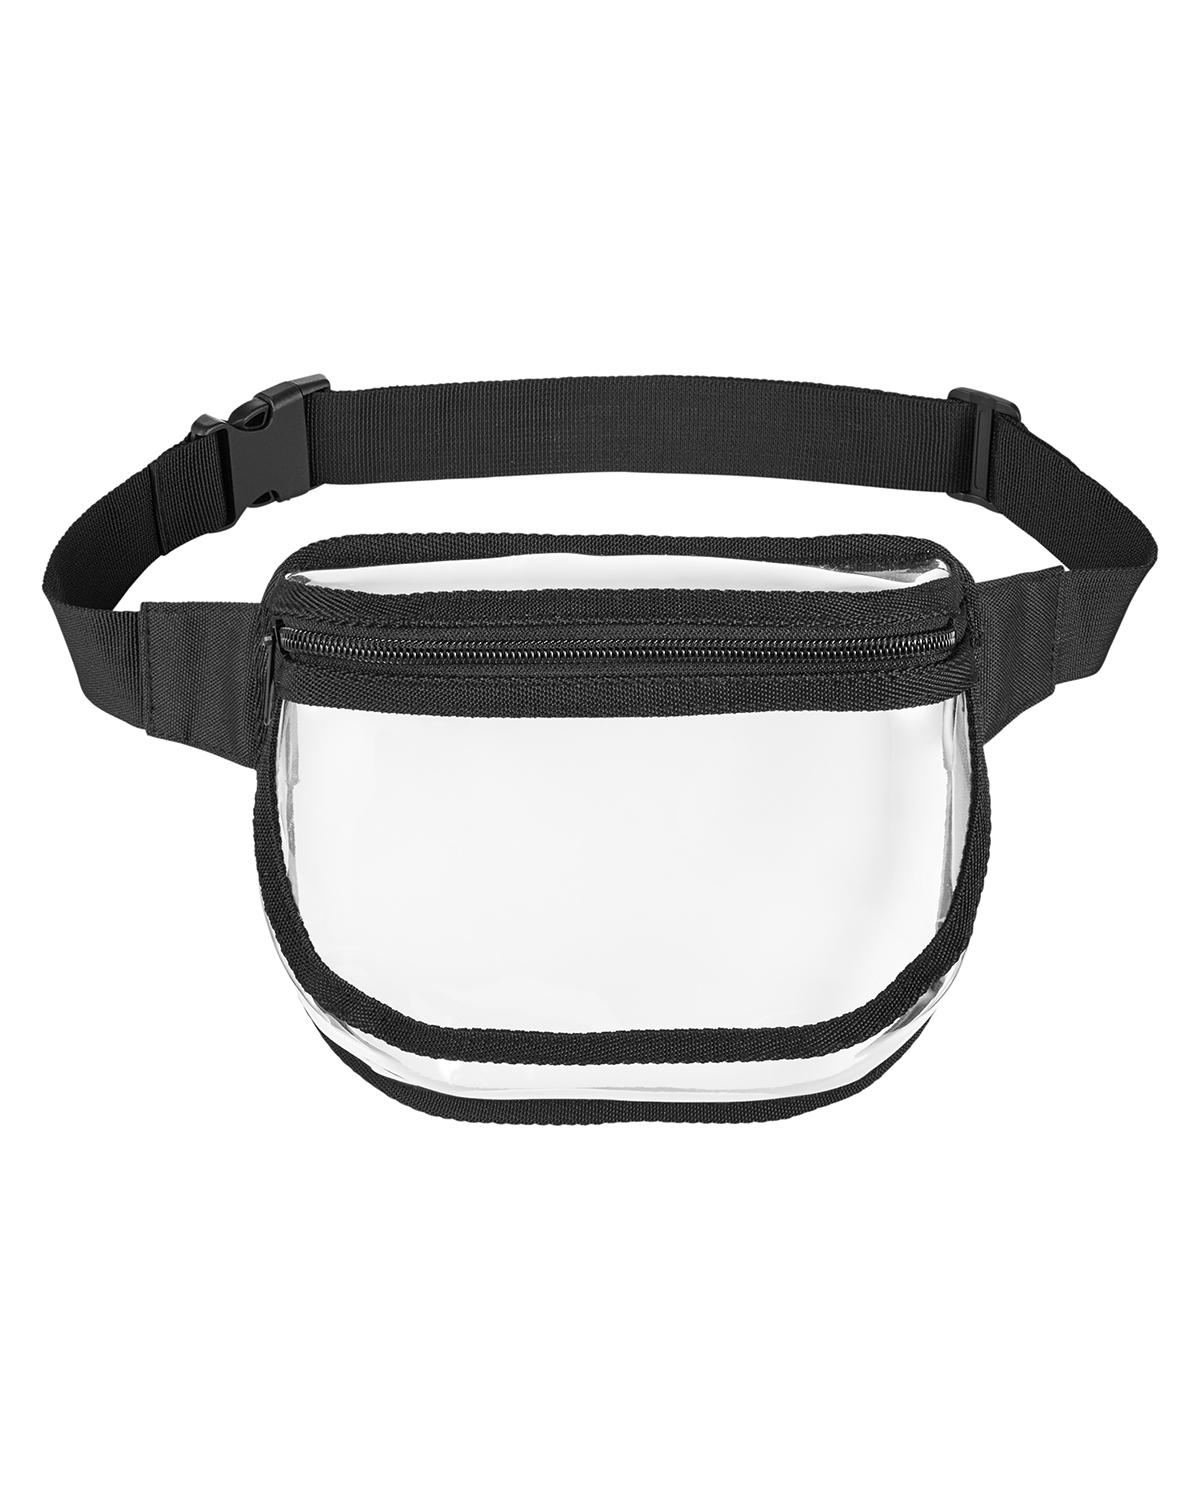 BAGedge BE264 Unisex Clear PVC Fanny Pack - Shirtmax